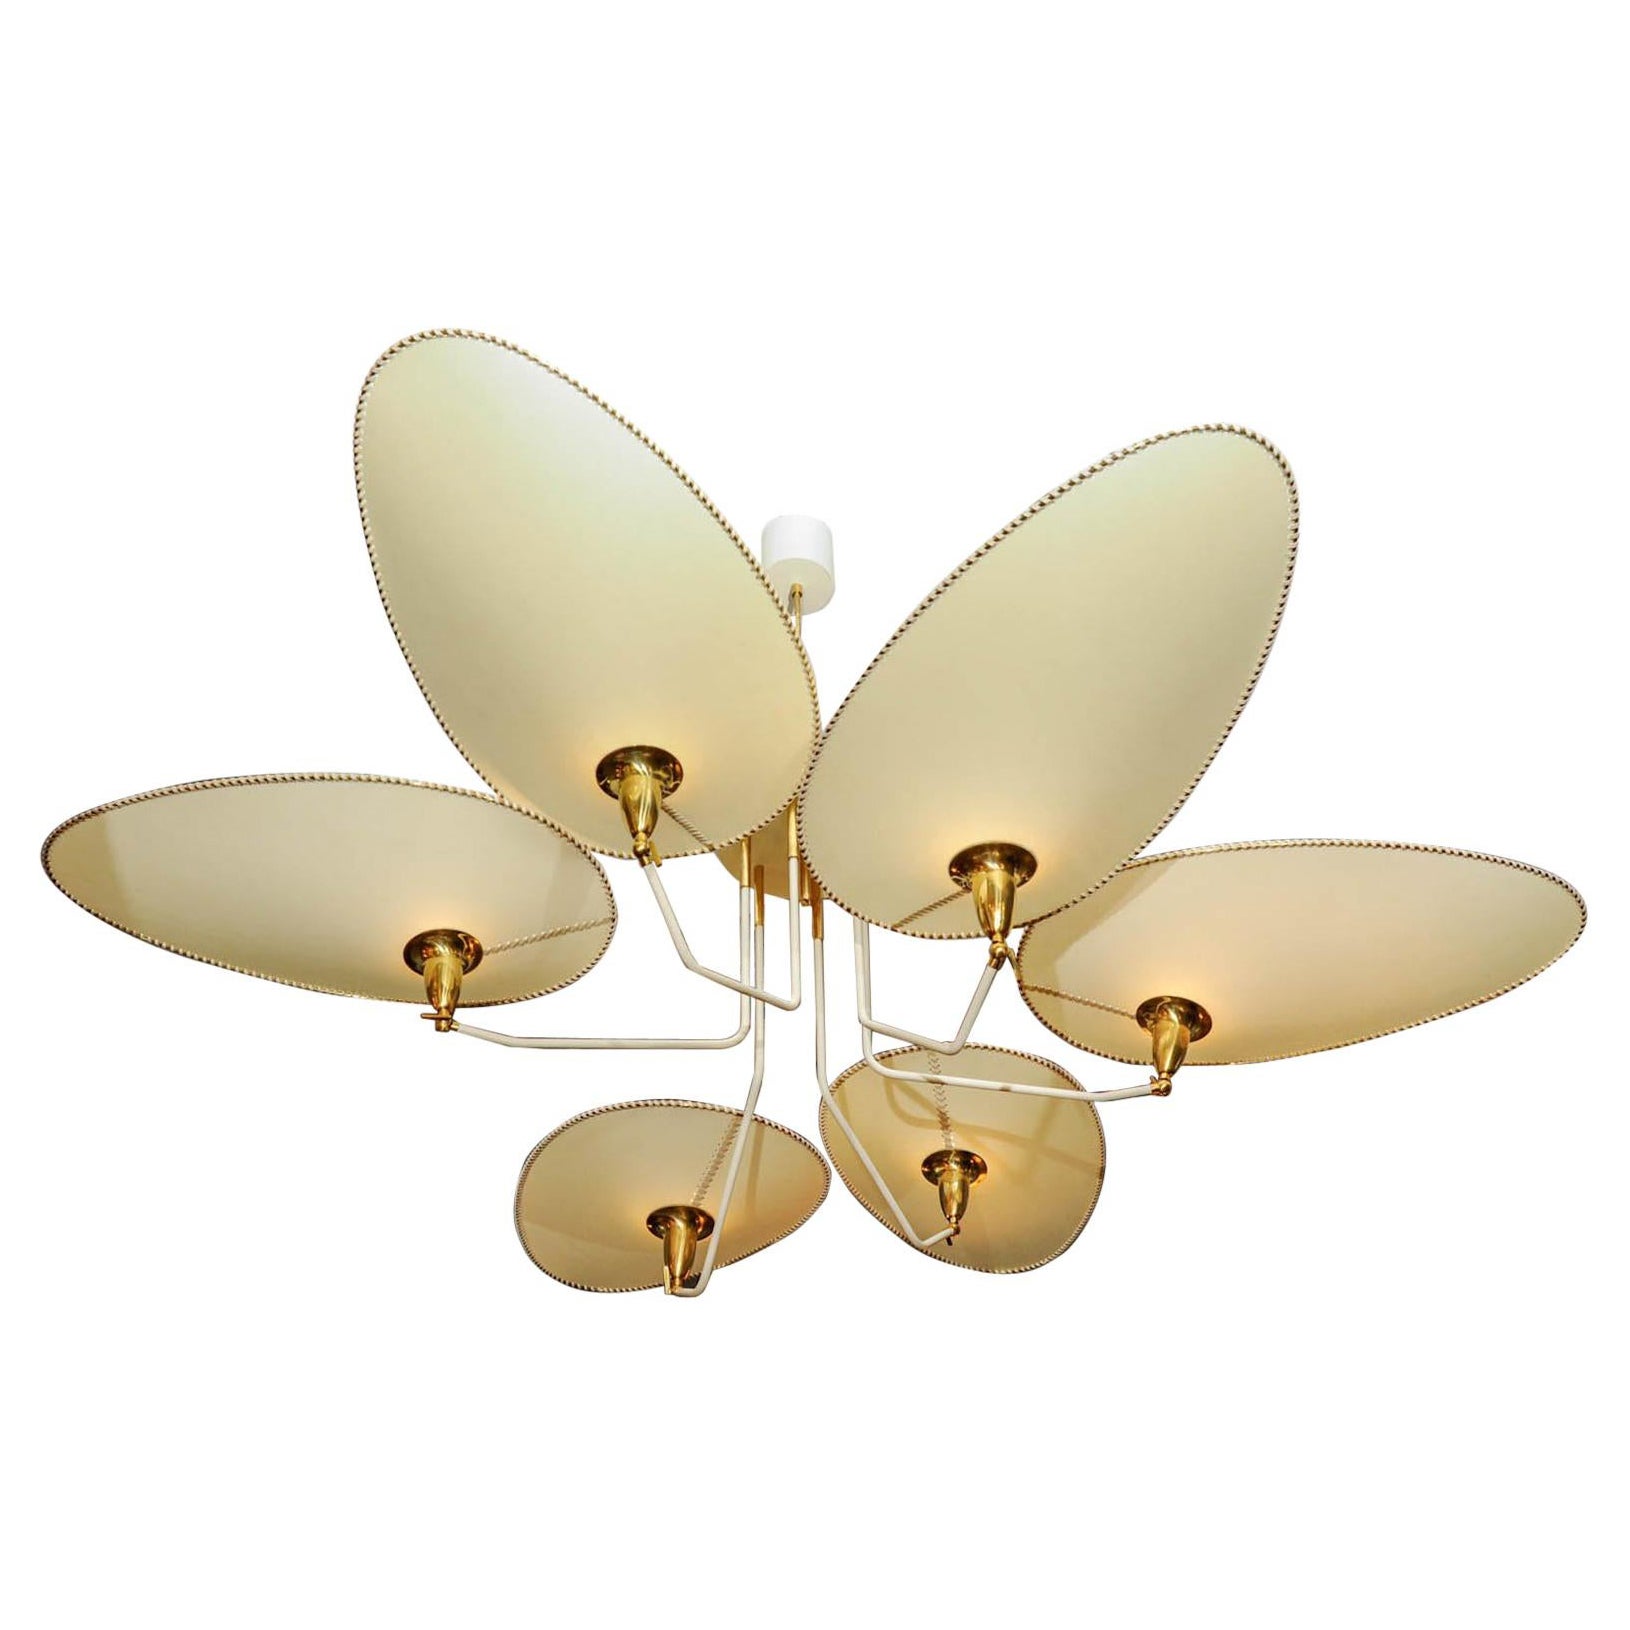 Brass and Parchment Paper Chandelier by Diego Mardegan for Glustin Luminaires